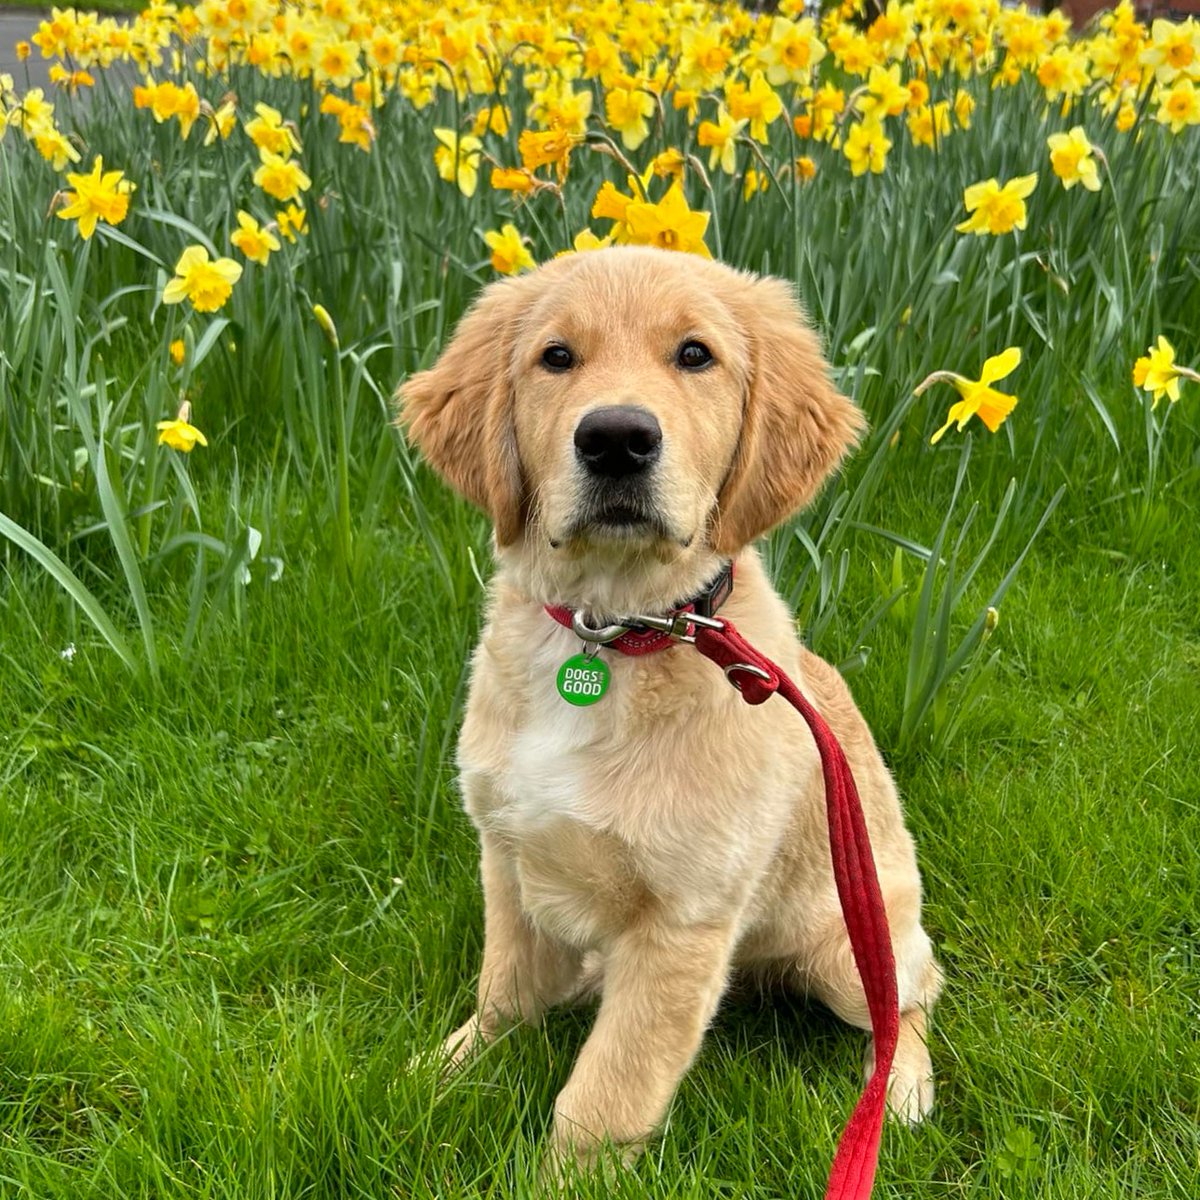 It's starting to look a lot like spring! 🍃 With the weather getting warmer and the days getting longer, puppy Ludo was out and about exploring the world earlier this week. We're looking for volunteers to look after puppies like Ludo. Learn more here: loom.ly/9LxeIyY